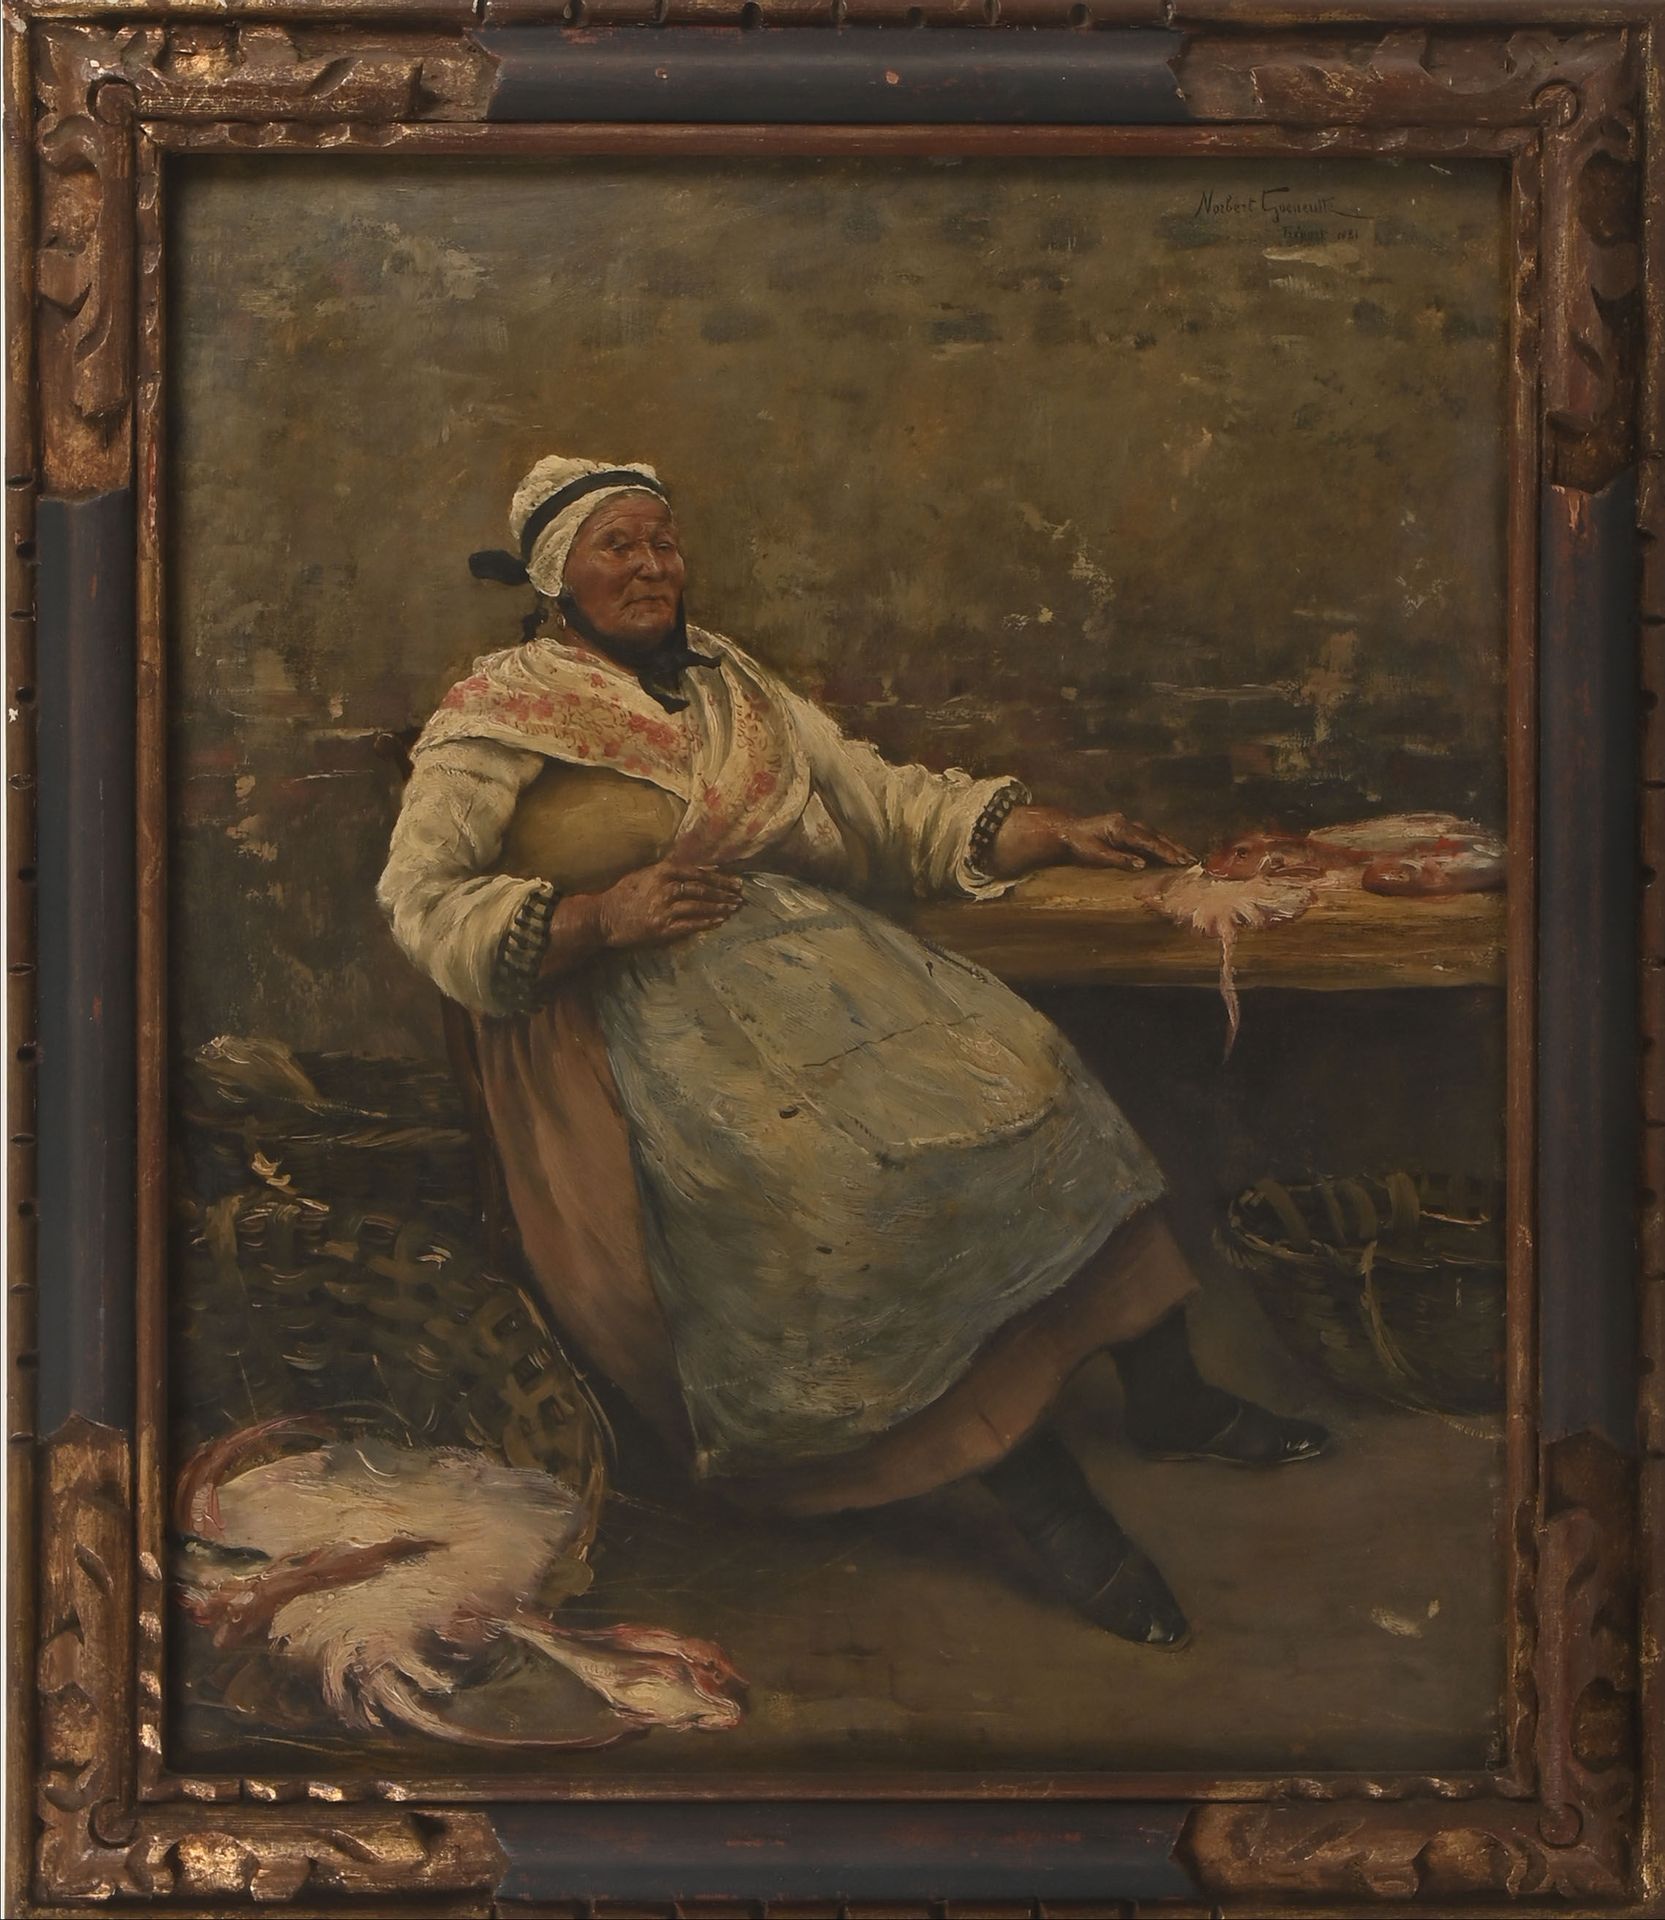 Null Norbert GOENEUTTE (1854-1894)
The Fishmonger
Oil on canvas
Signed and dated&hellip;